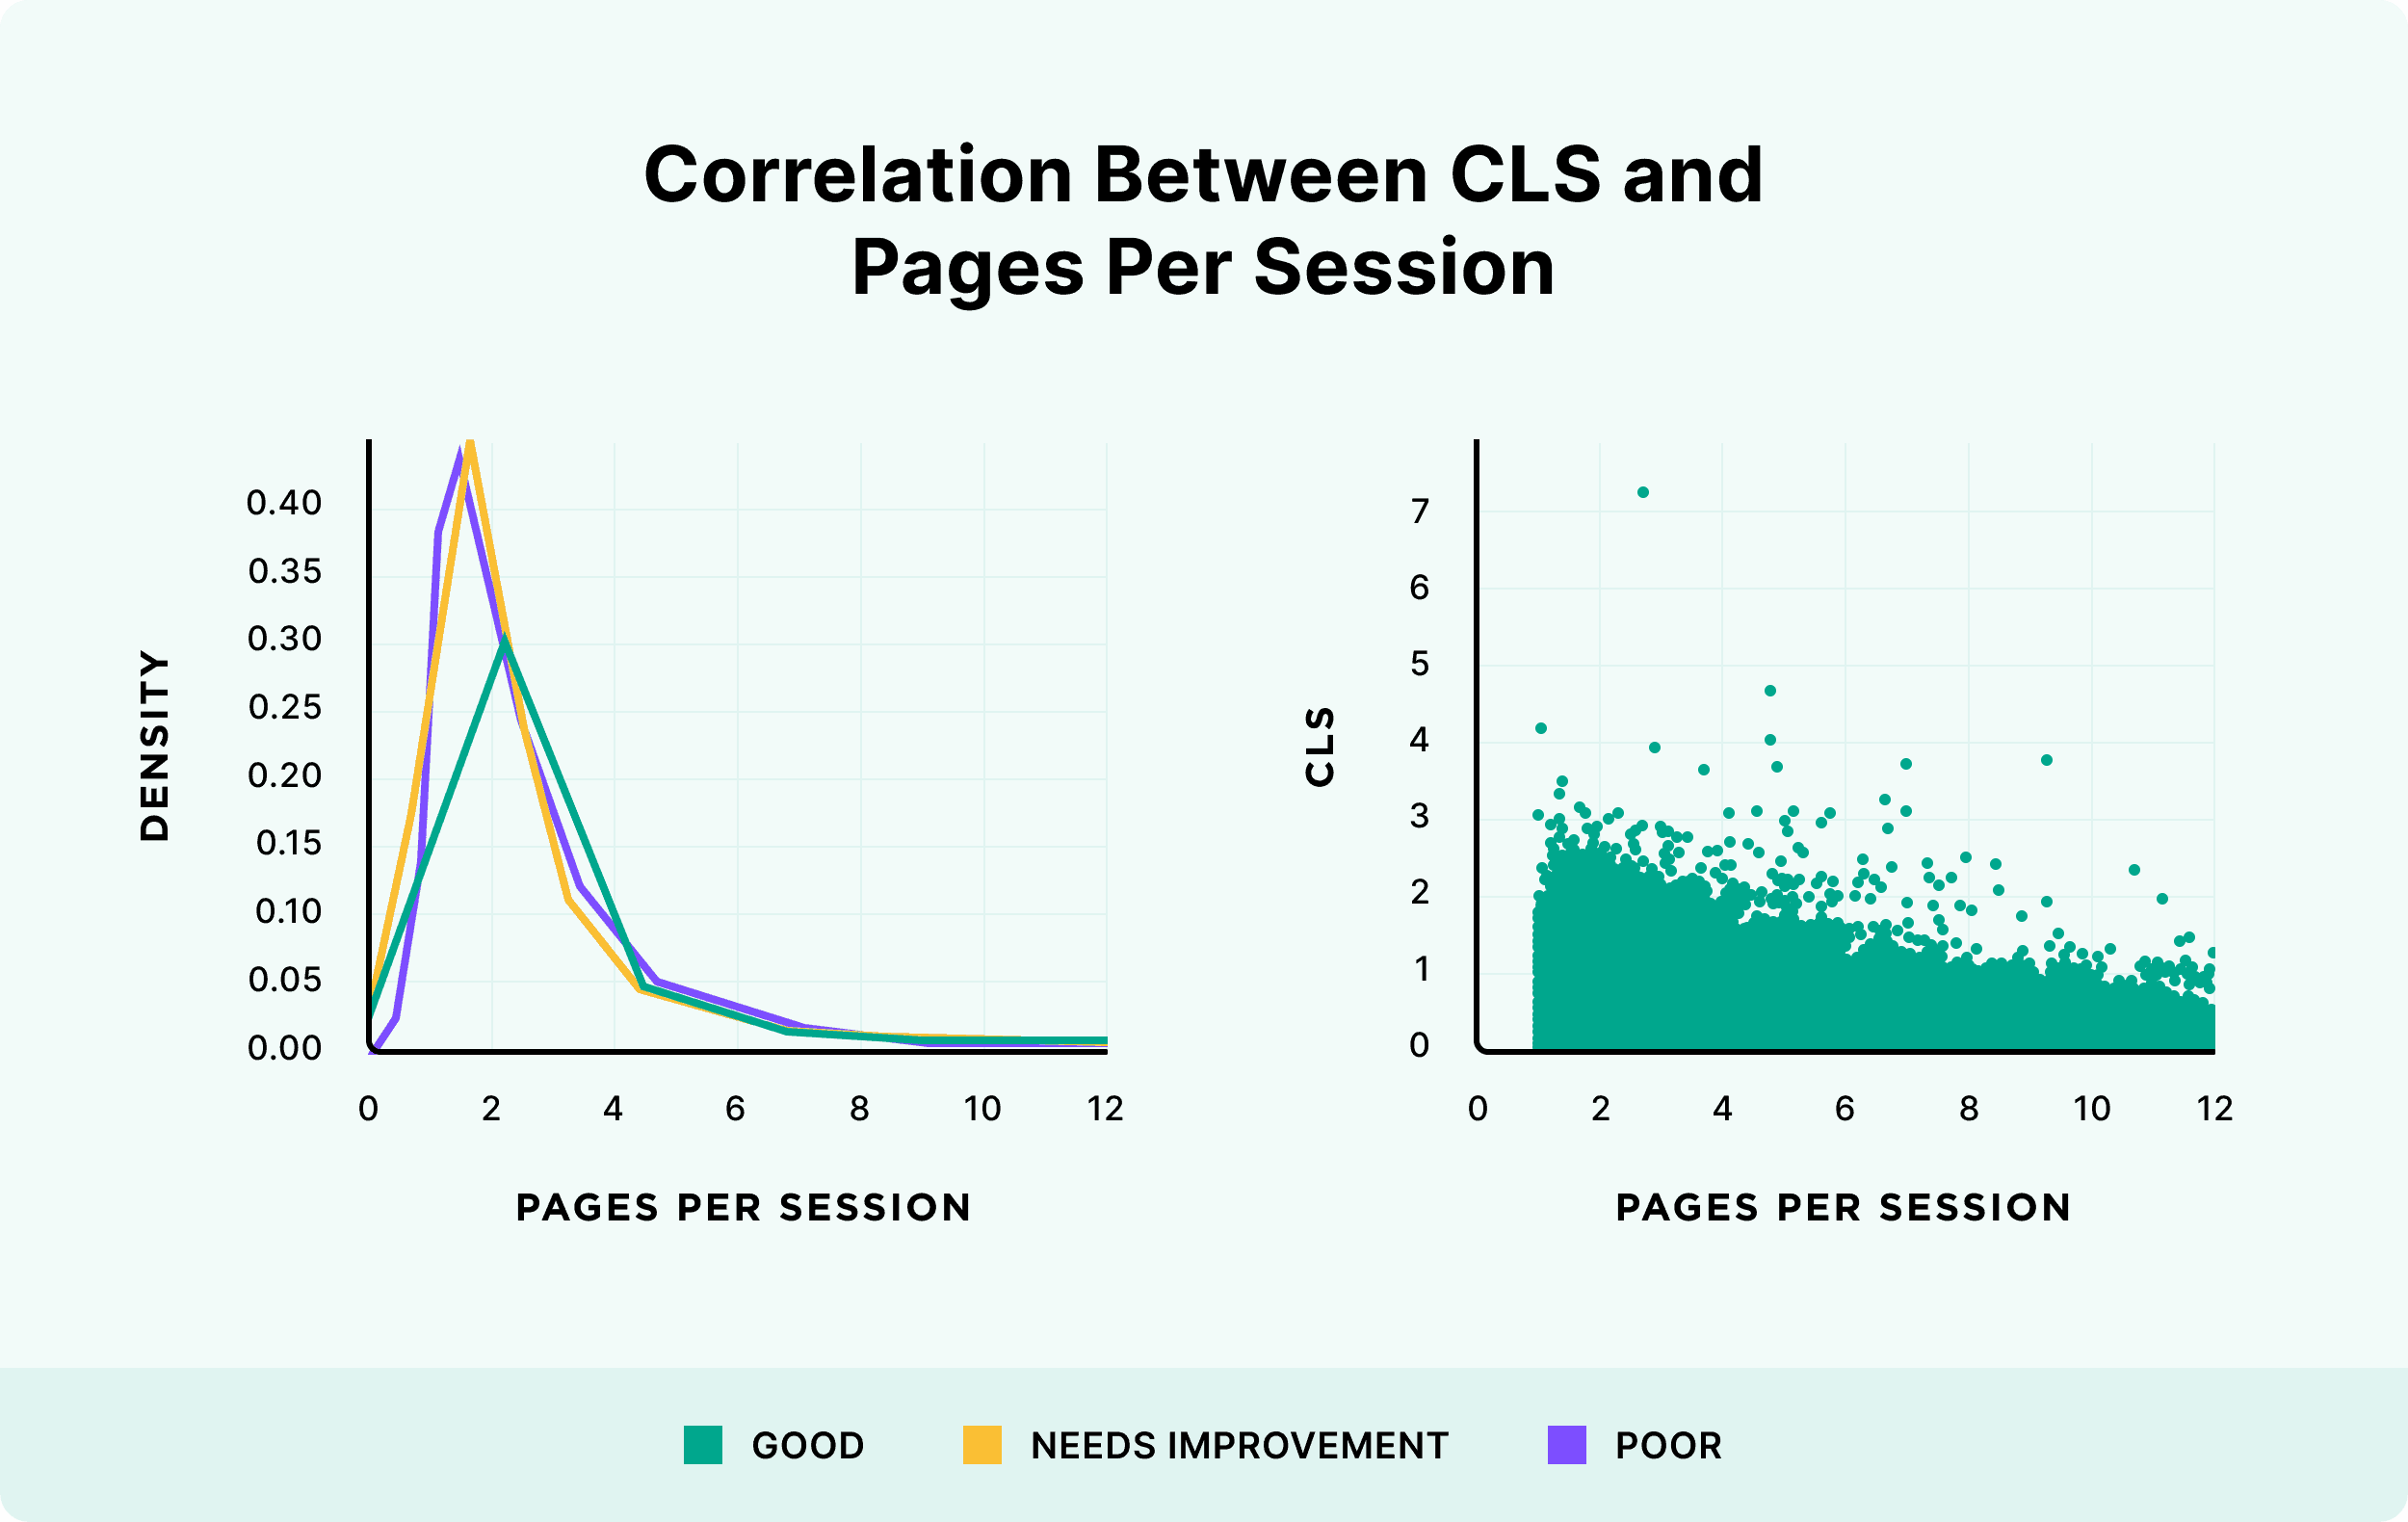 Correlation between CLS and pages per session